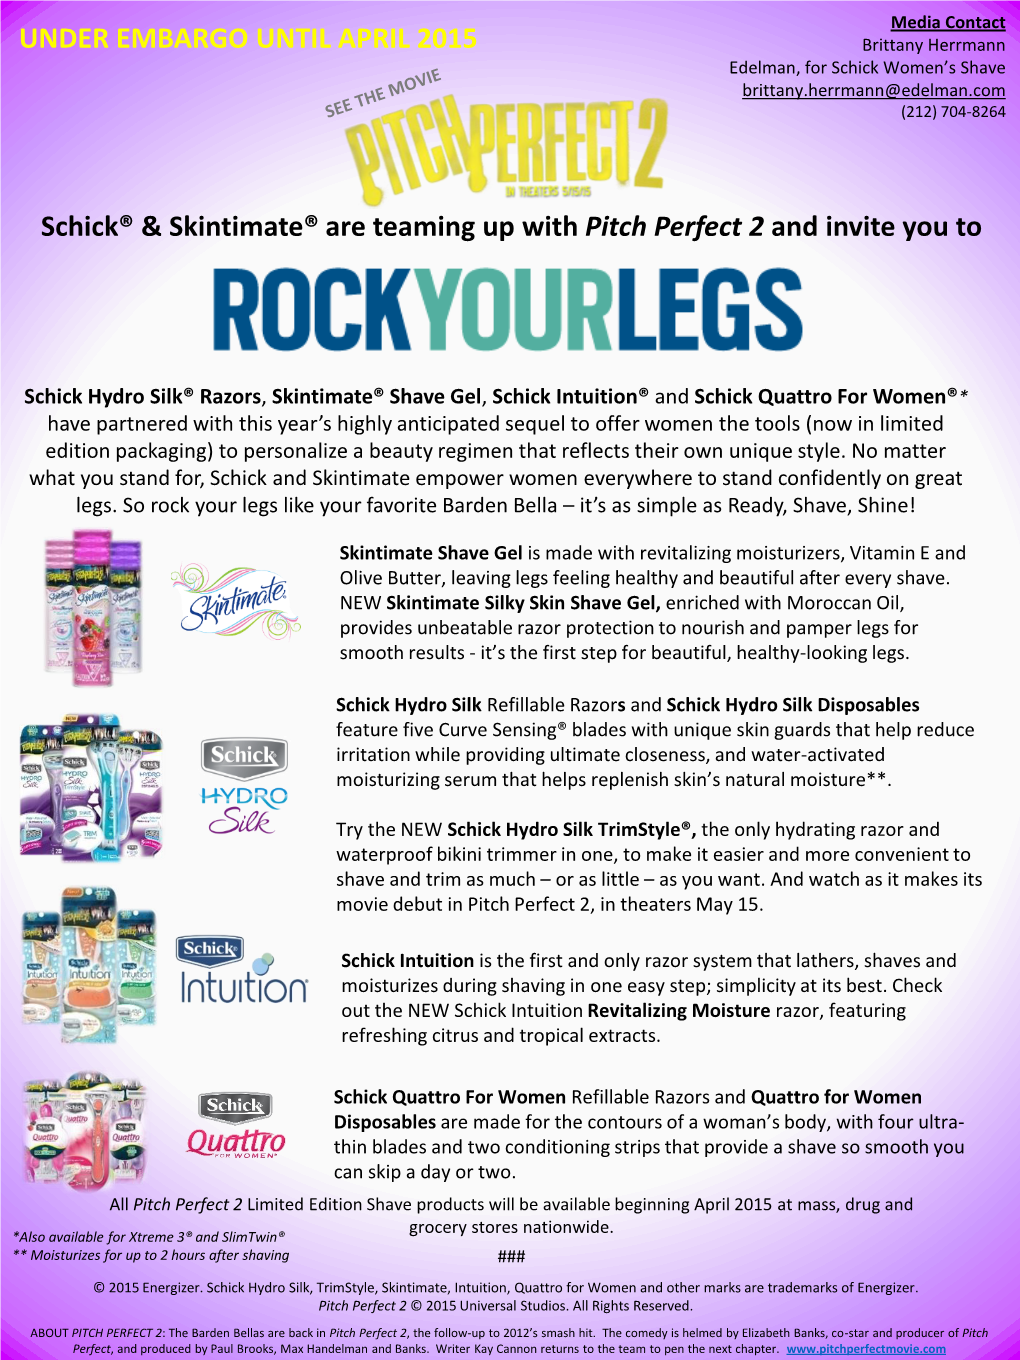 Schick® & Skintimate® Are Teaming up with Pitch Perfect 2 and Invite